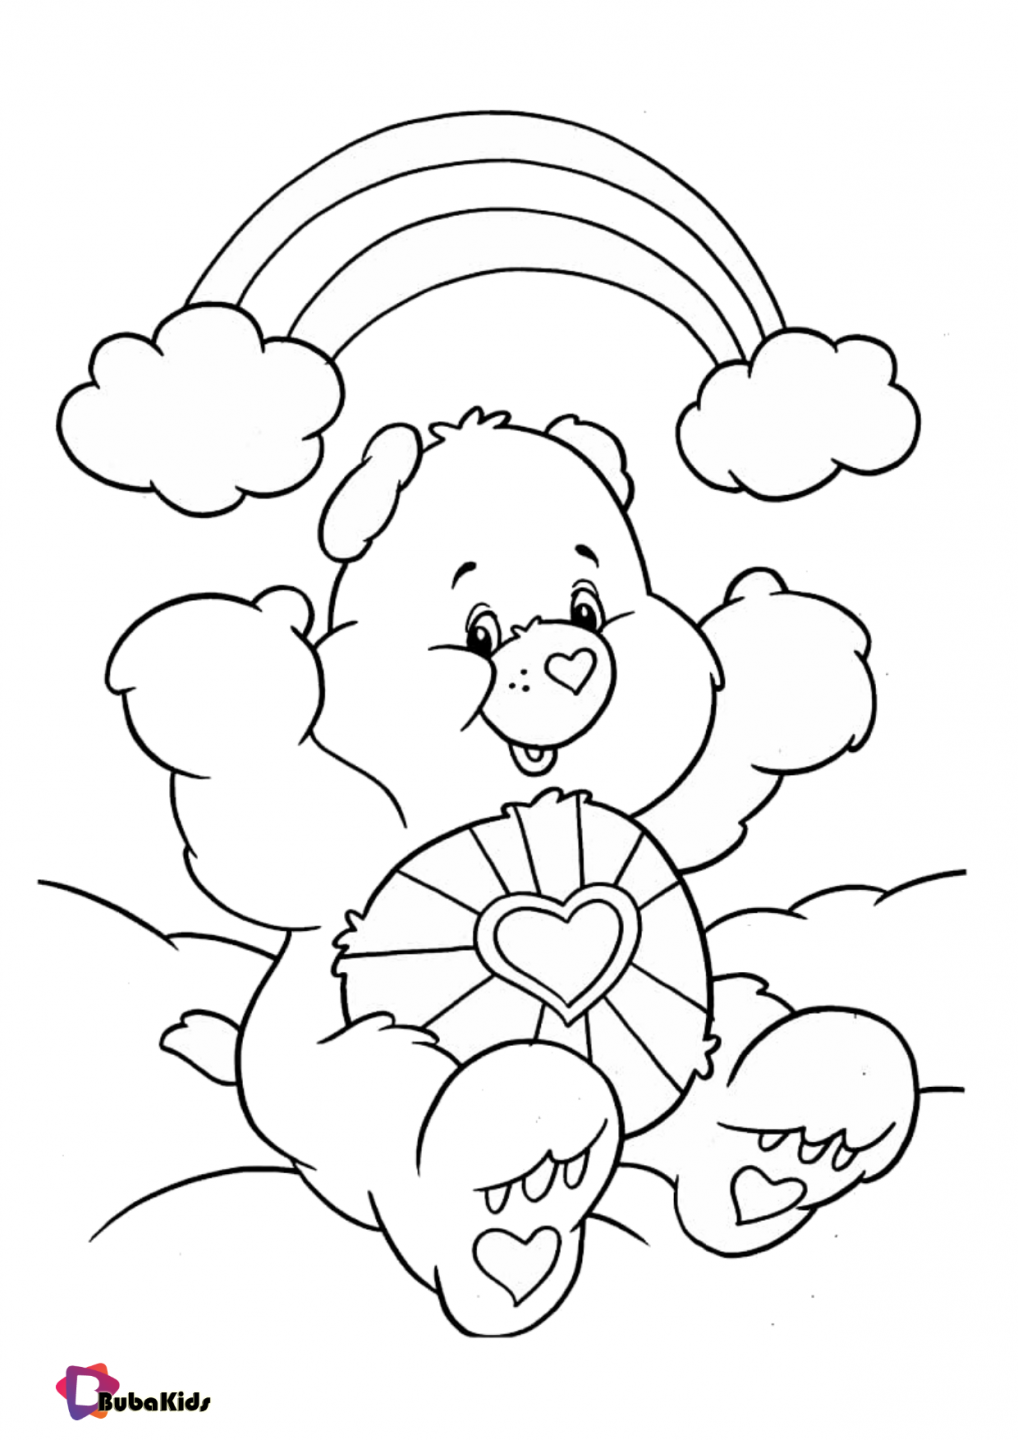 Cute bear and rainbow coloring page | BubaKids.com